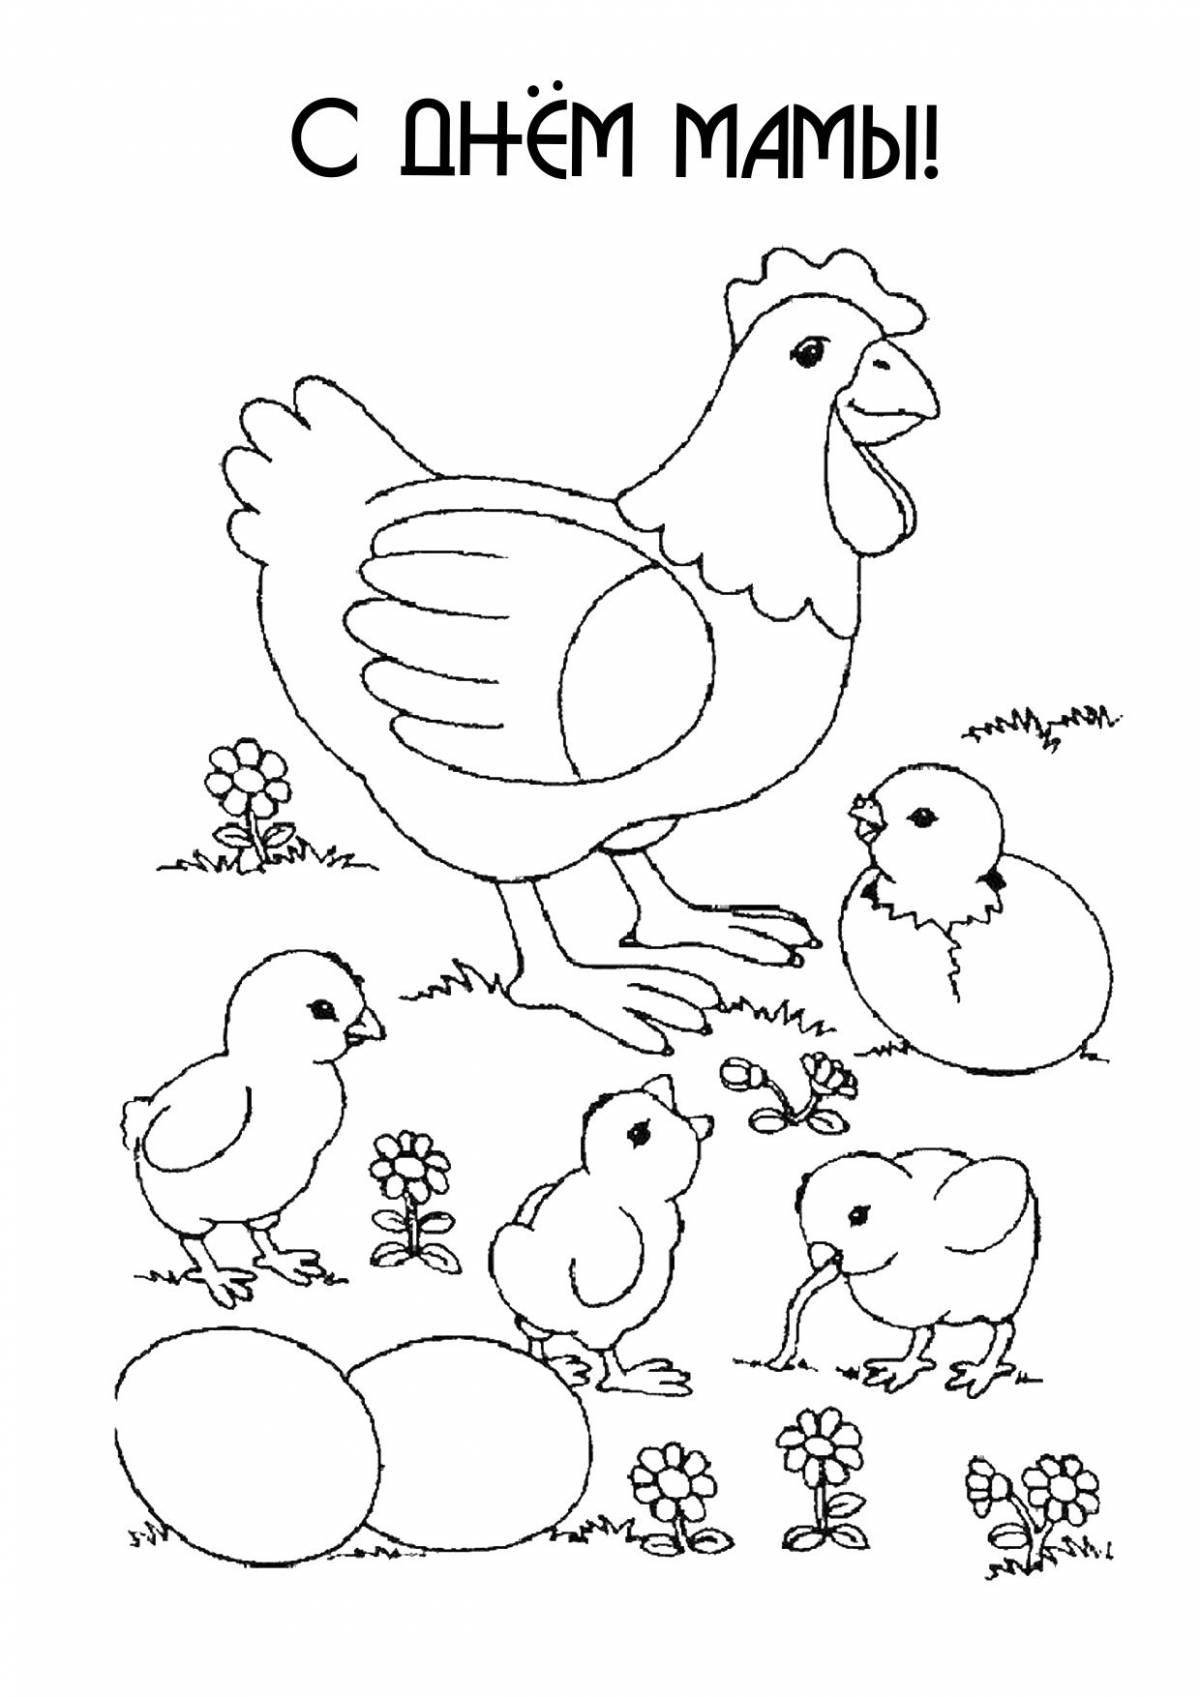 Bright bird coloring book for 5-6 year olds